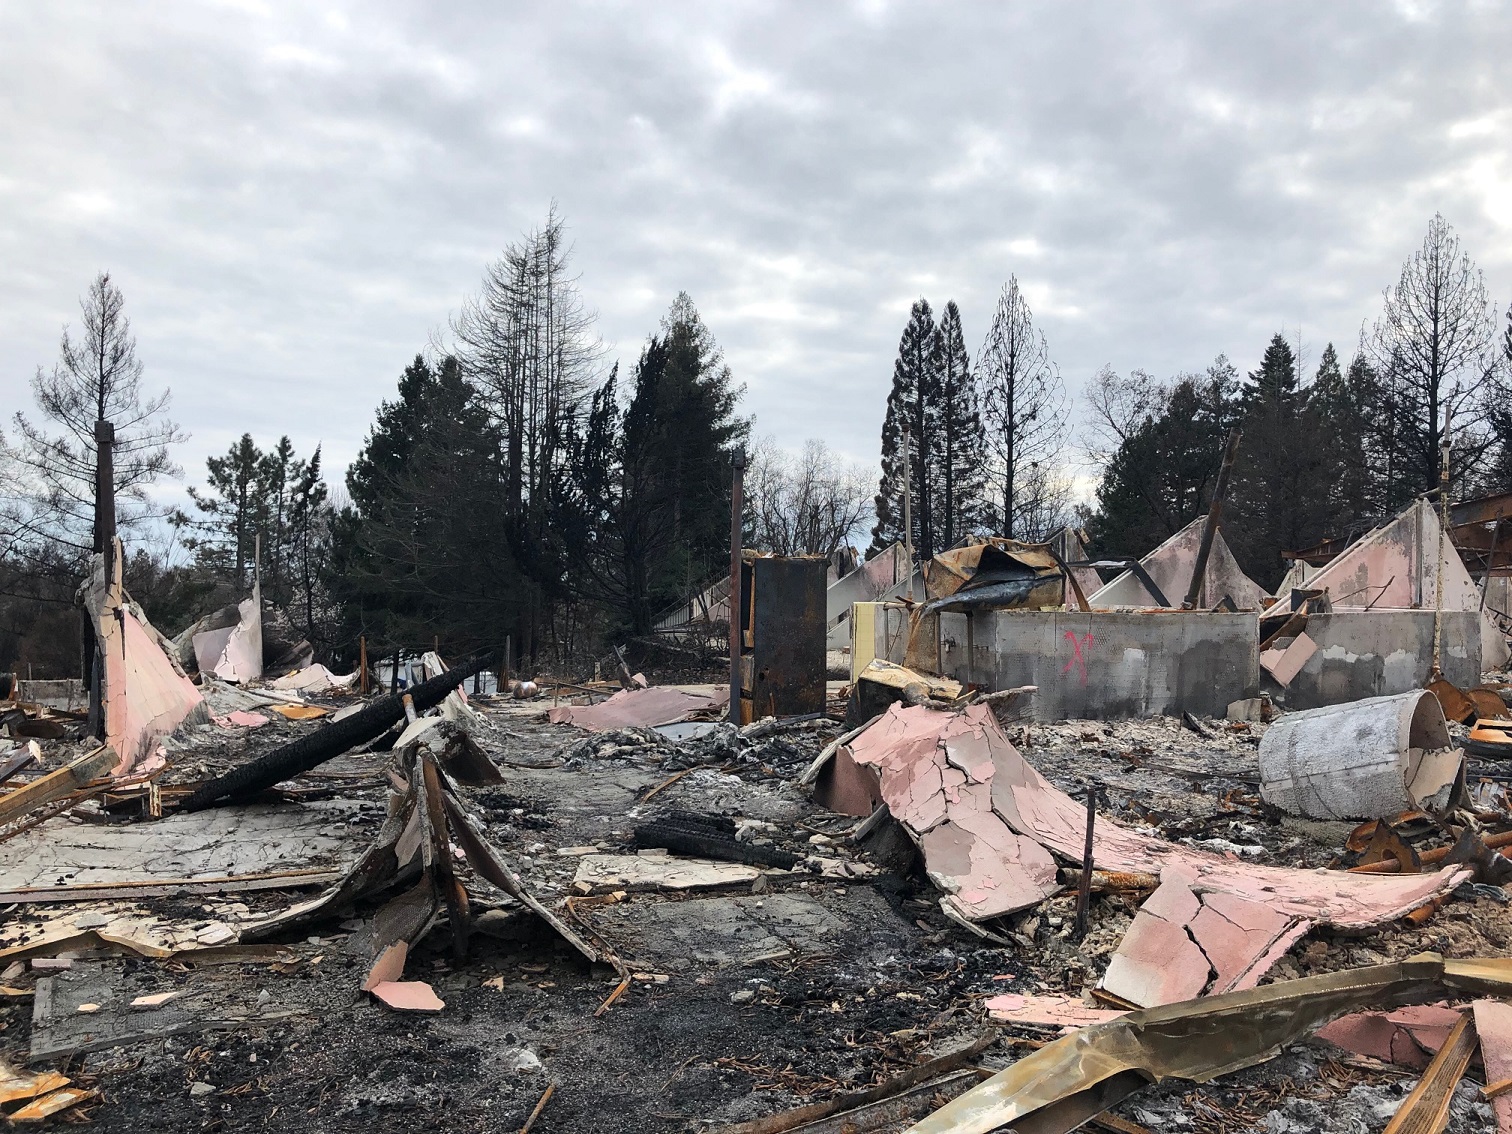 Post-Camp Fire devastation in Paradise, CA.